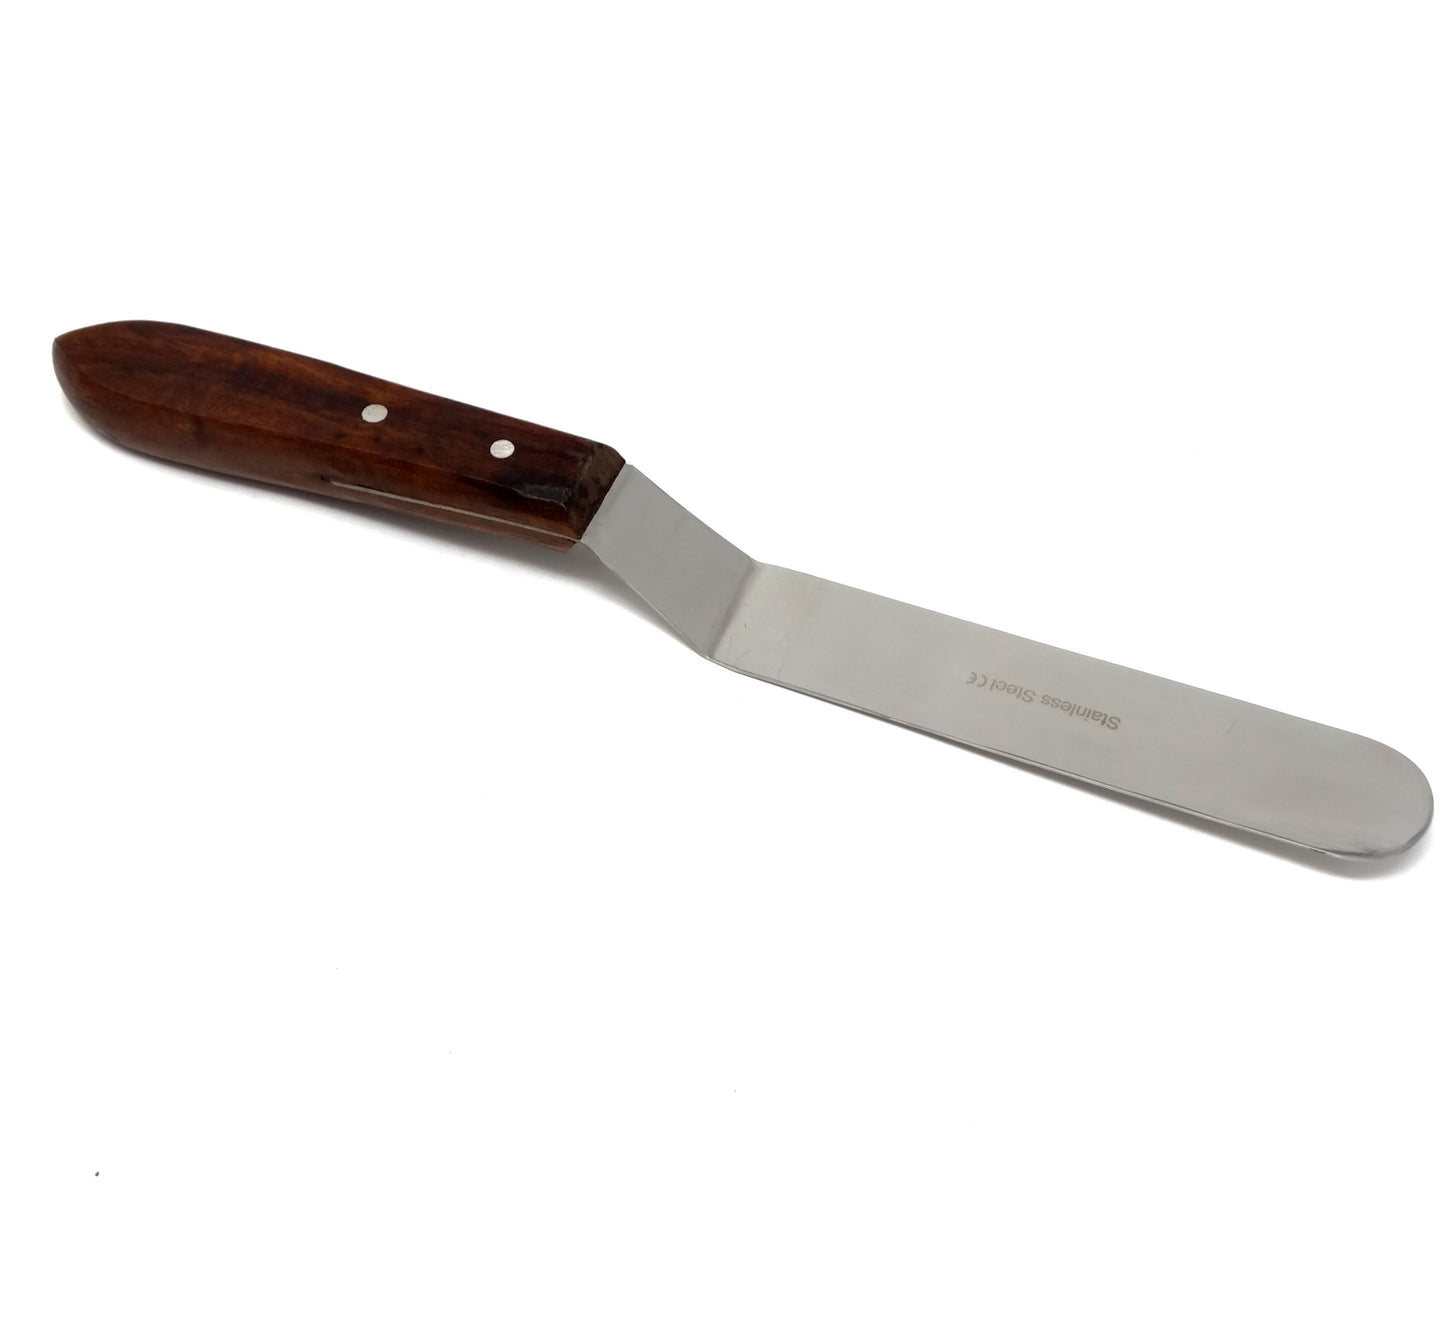 Stainless Steel Lab Spatula with Wooden Handle, 5" Offset Bayonet Blade, 9" Total Length